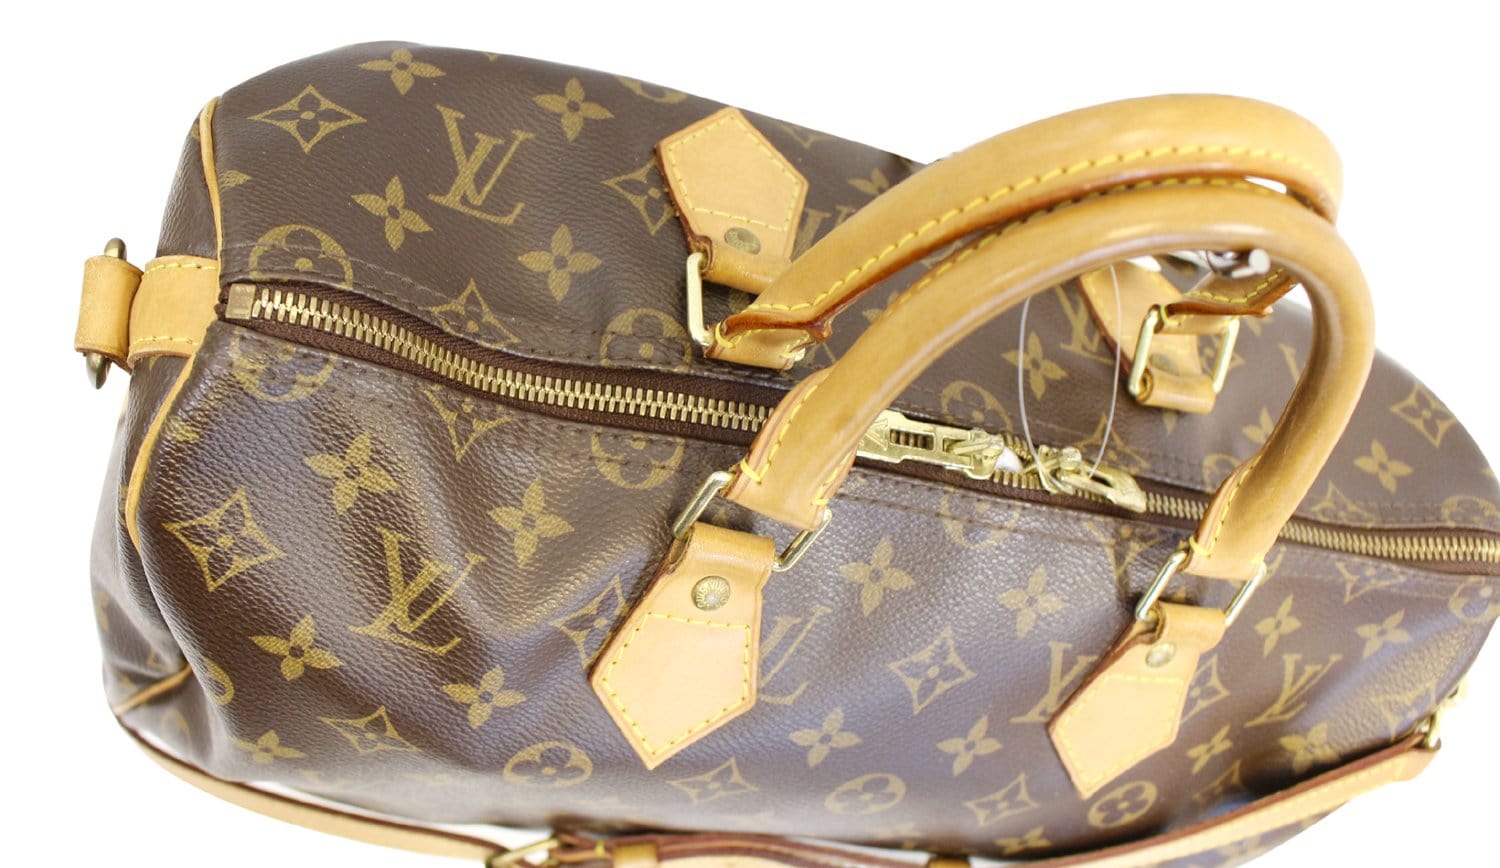 Louis Vuitton Monogram Speedy 35 Bandouliere NM with Luggage Tag